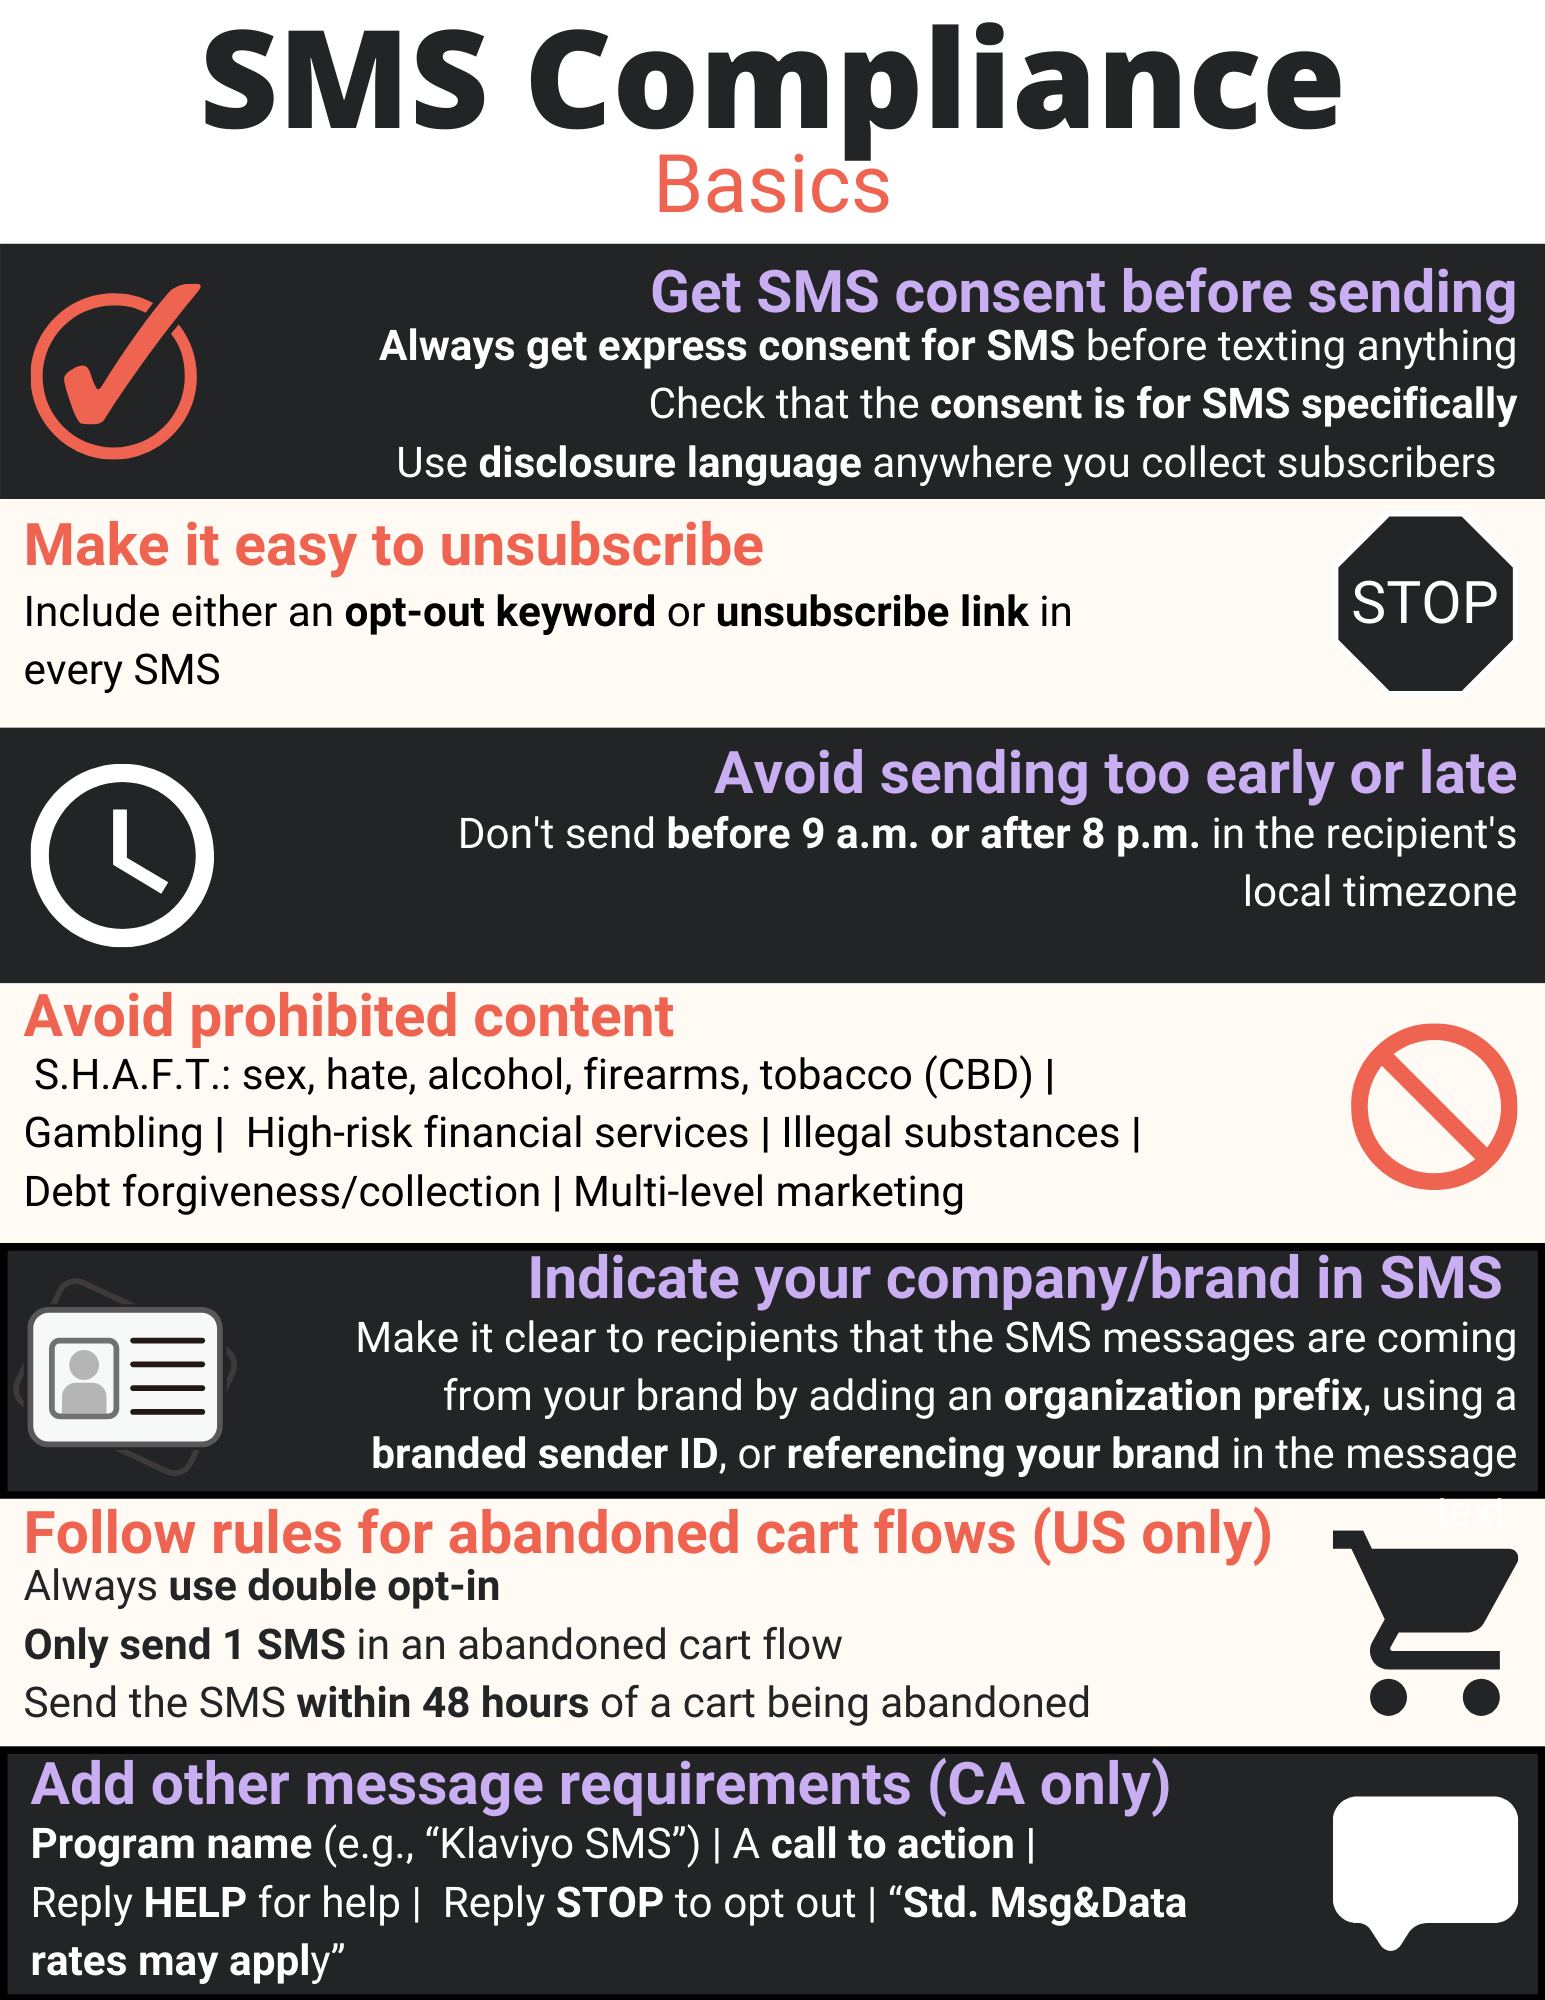 Infographic of the 7 basics of SMS compliance